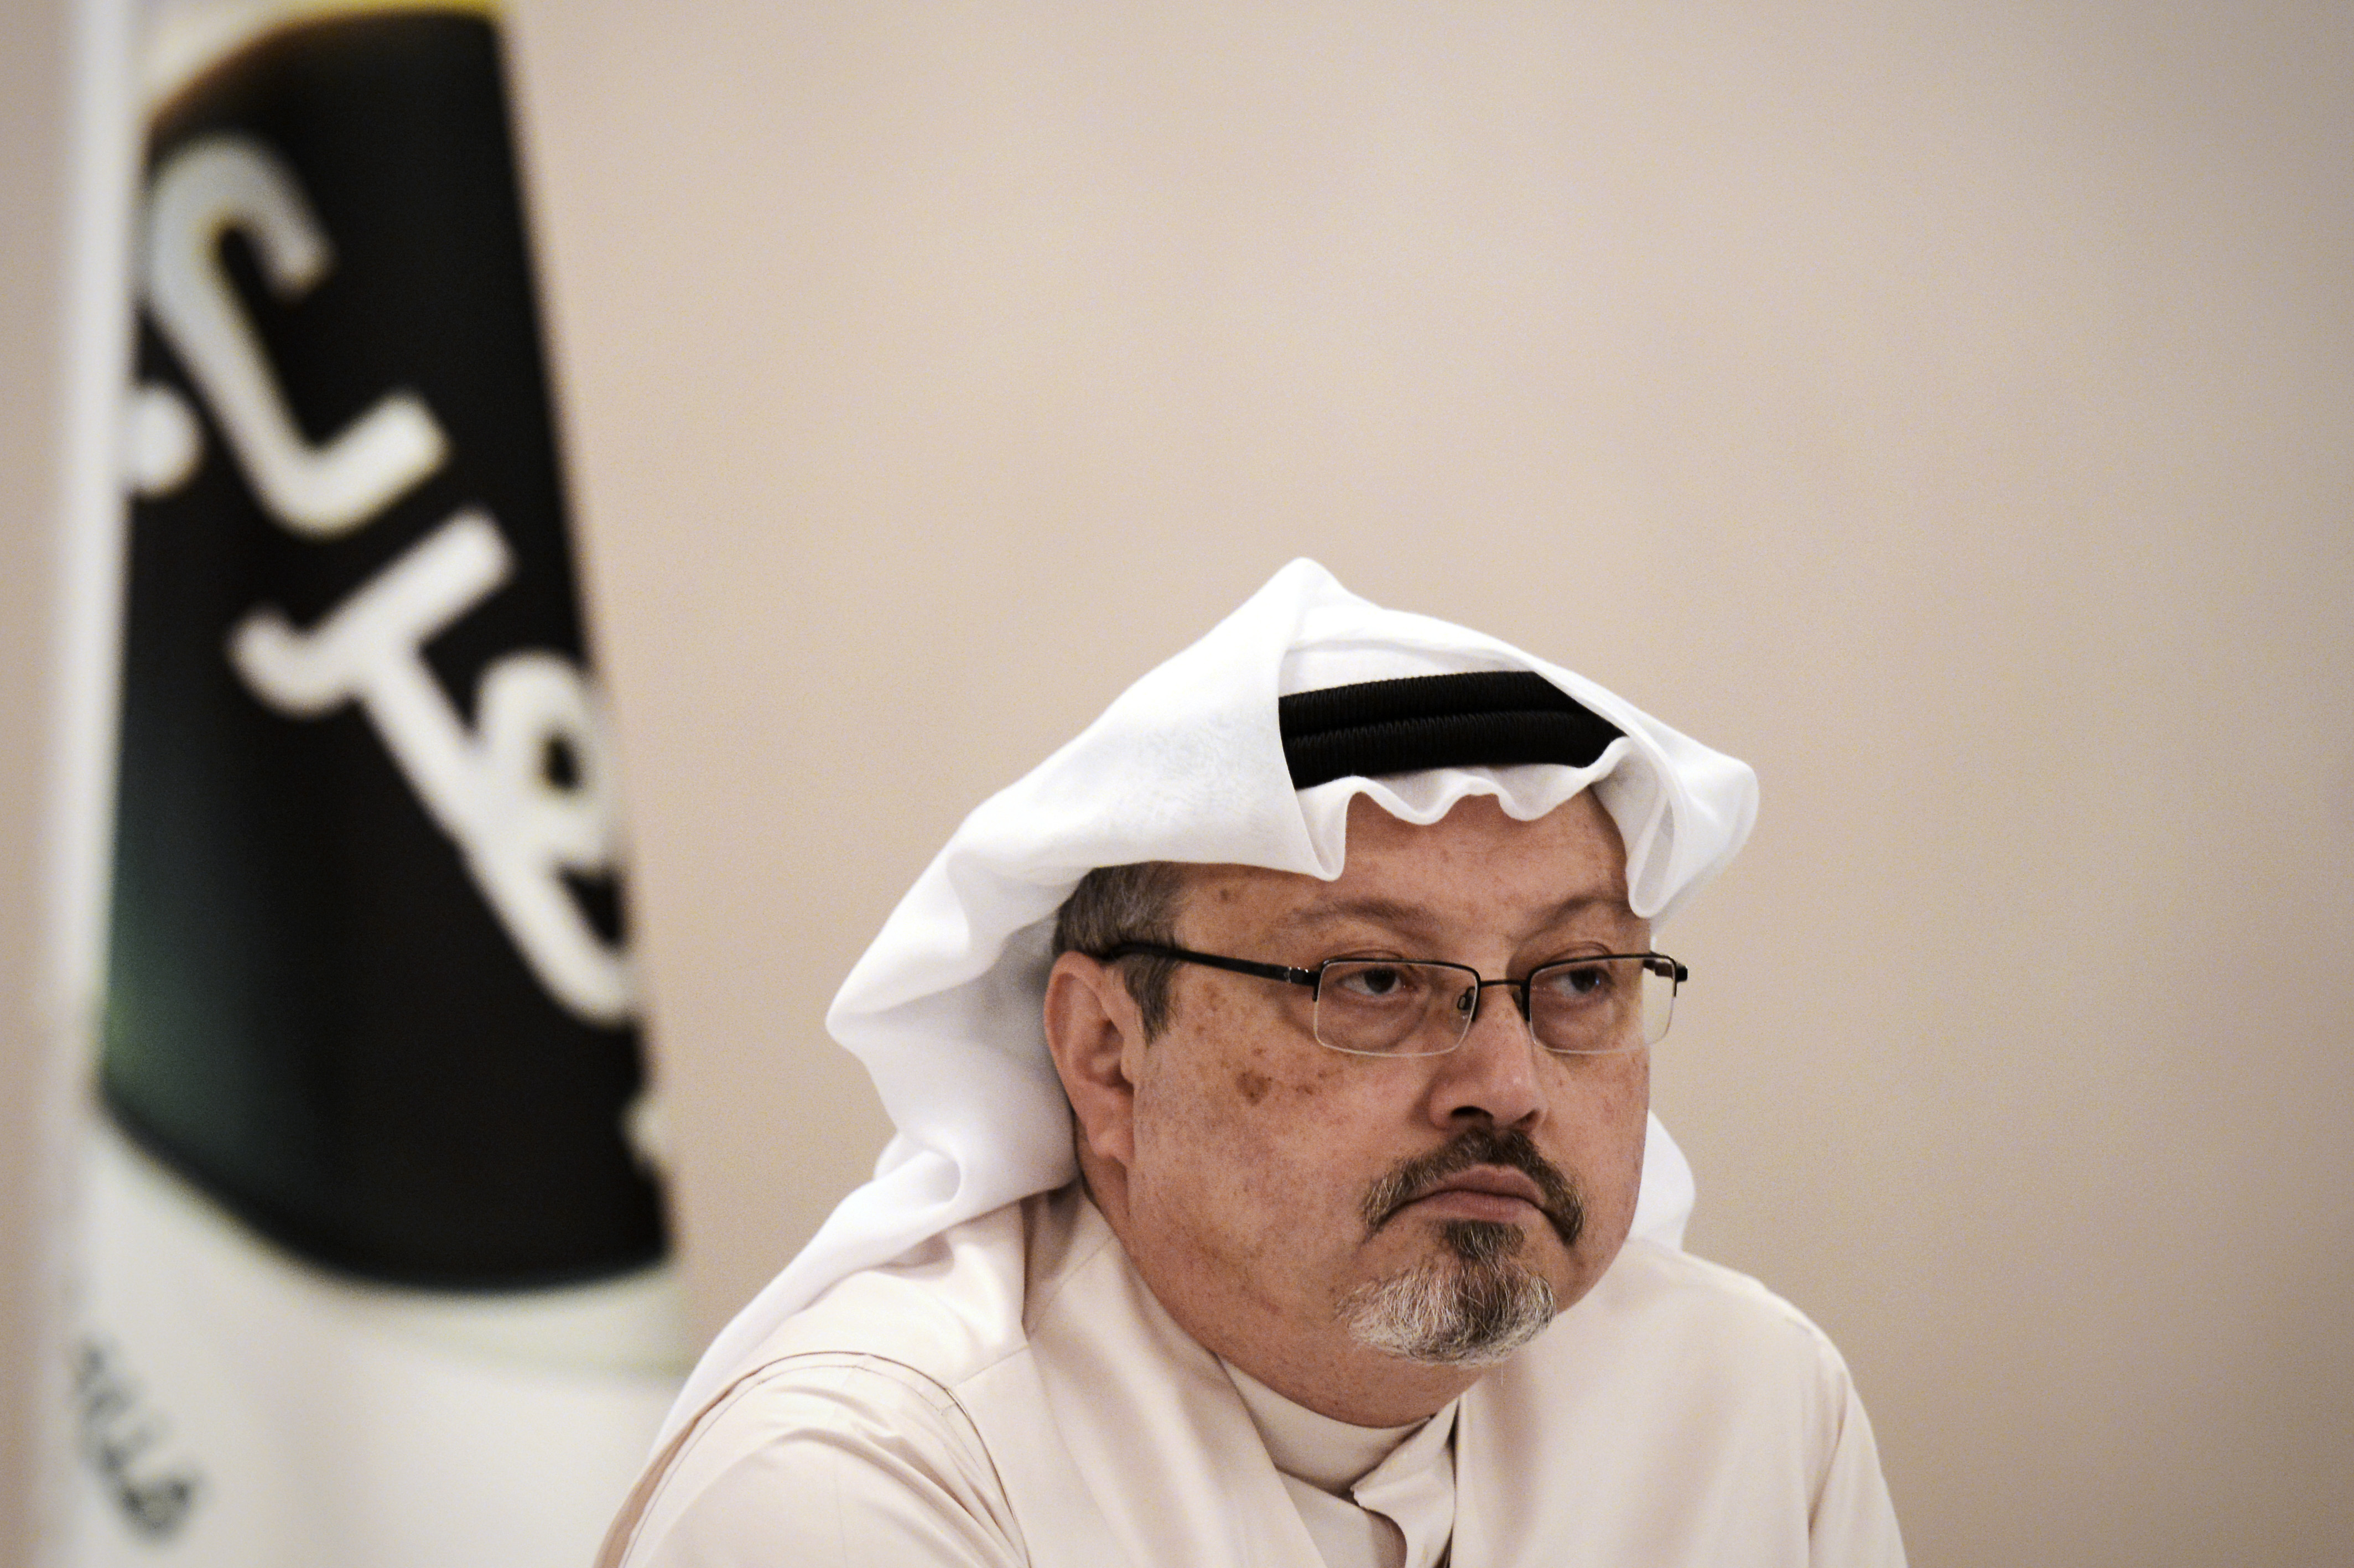 A general manager of Alarab TV, Jamal Khashoggi, looks on during a press conference in the Bahraini capital Manama, on December 15, 2014. The pan-Arab satellite news broadcaster owned by billionaire Saudi businessman Alwaleed bin Talal will go on air February 1, promising to "break the mould" in a crowded field.AFP PHOTO/ MOHAMMED AL-SHAIKH (Photo by MOHAMMED AL-SHAIKH/AFP/Getty Images)